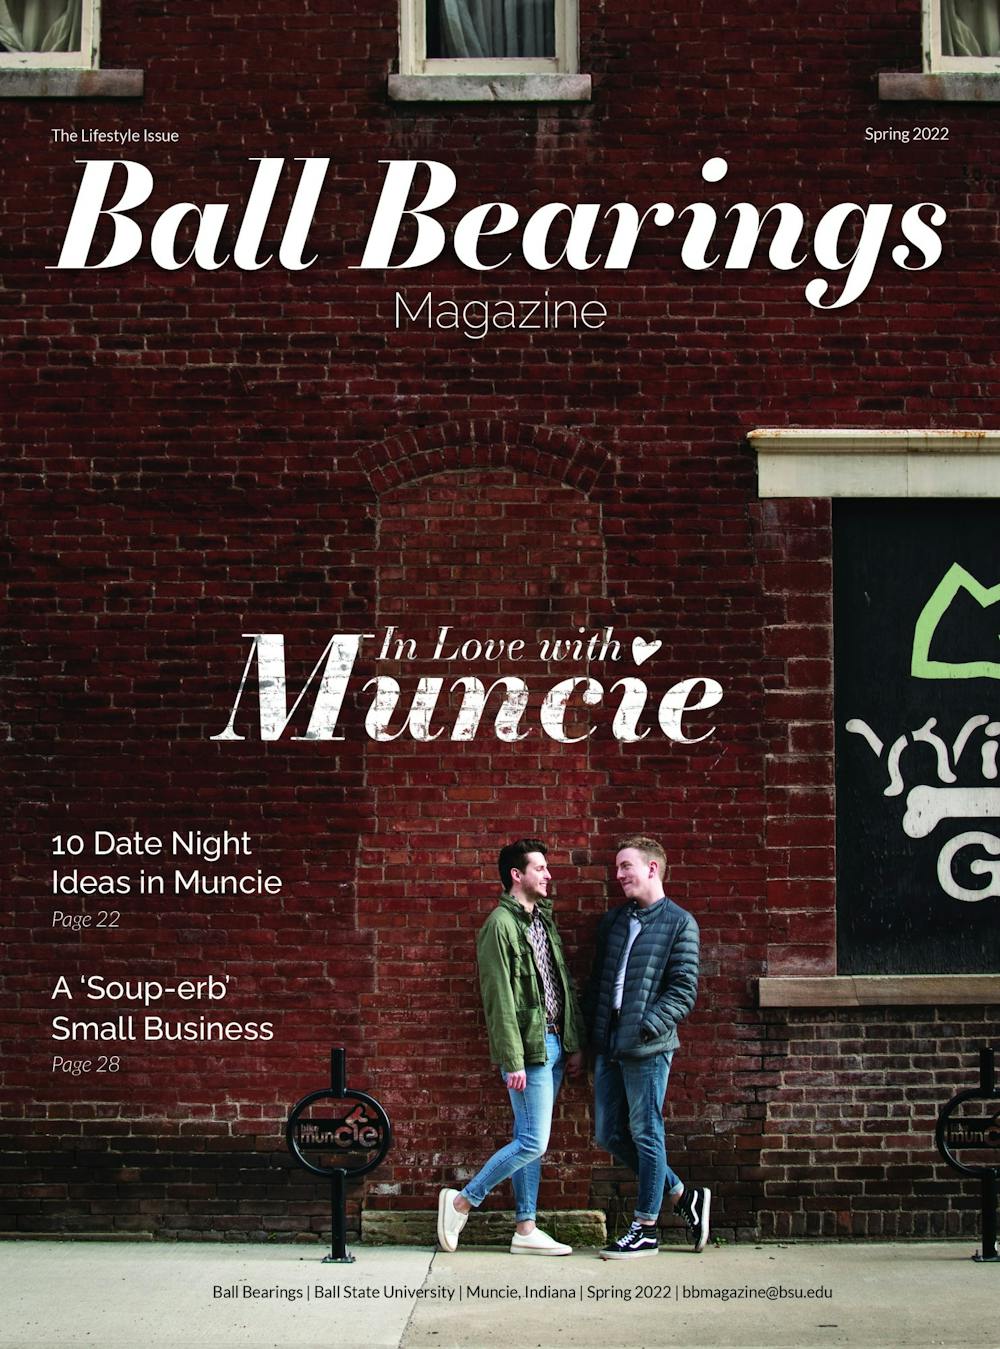 Newest edition of Ball Bearings Magazine out now!